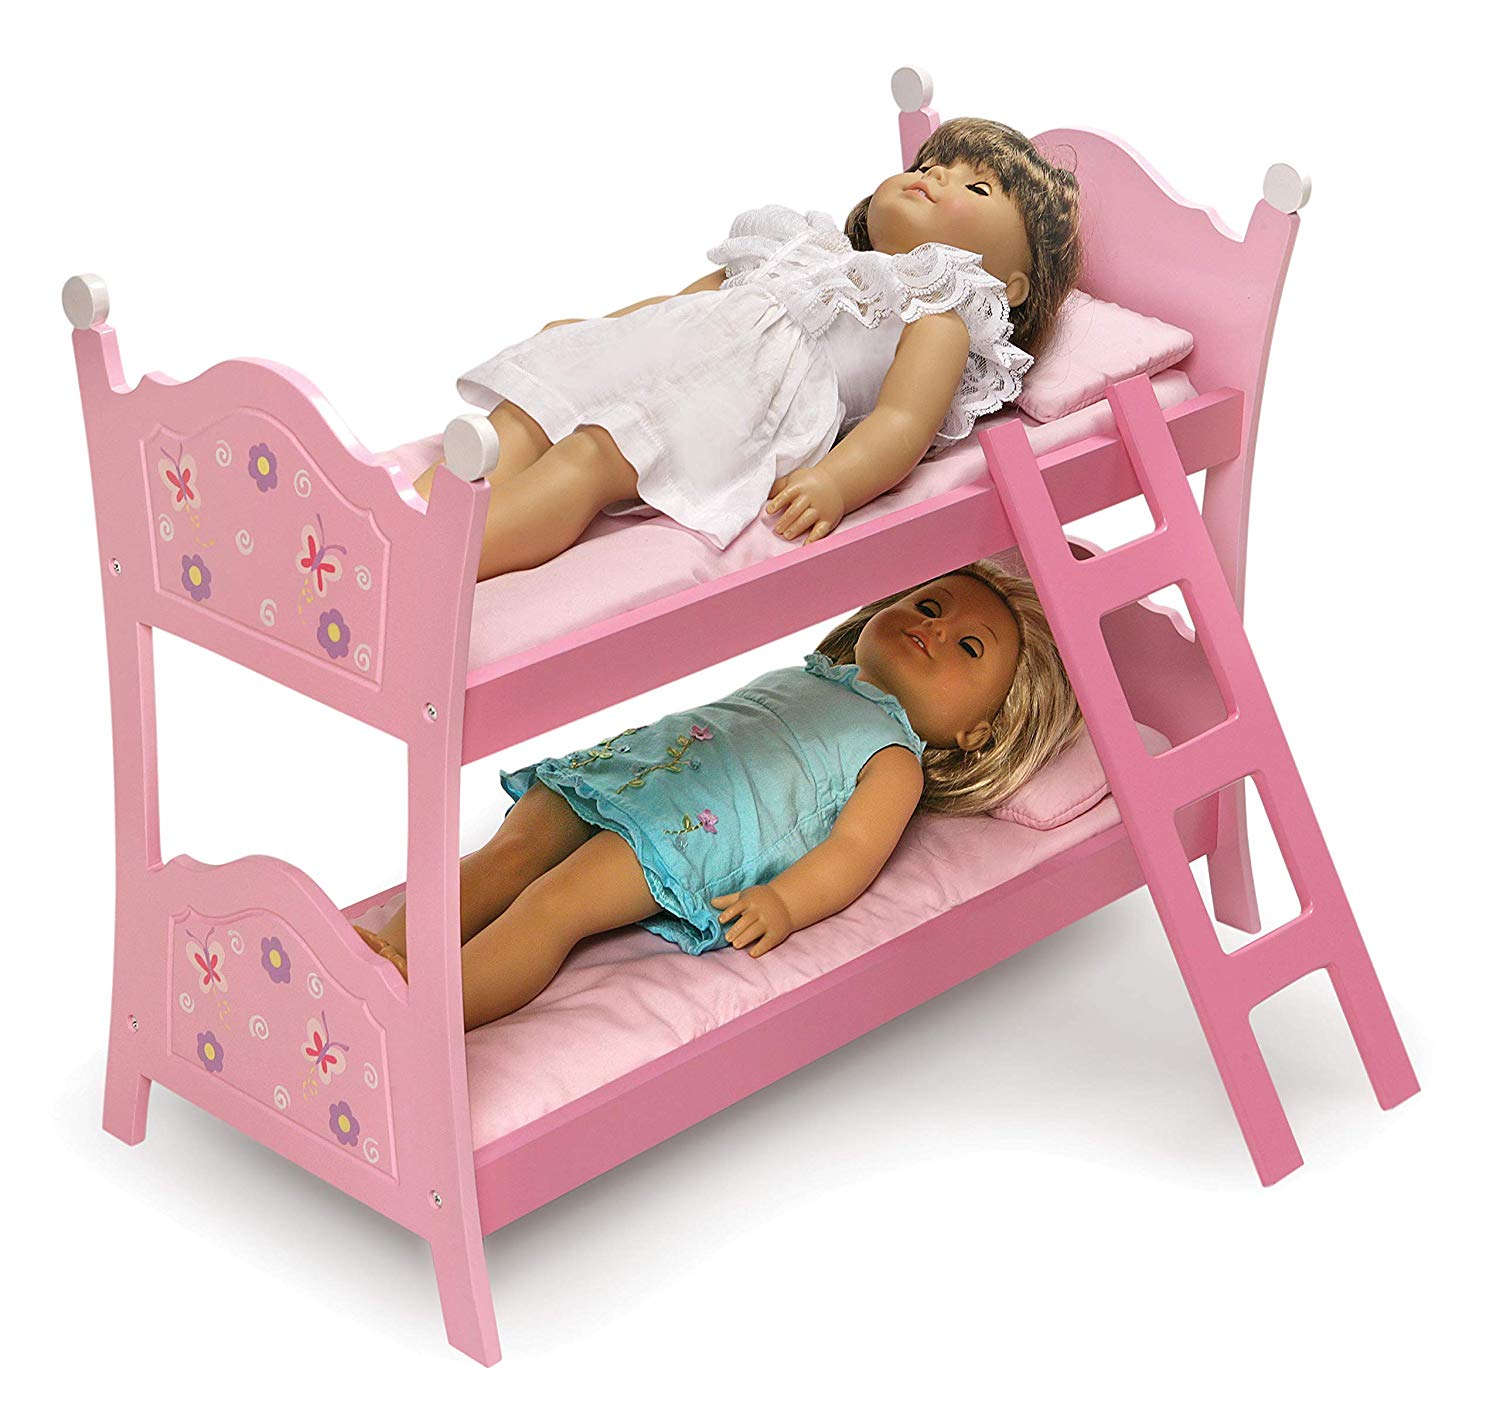 Blossoms and Butterflies Doll Bunk Bed-Material:100% Polyester Fabric - image 3 of 3